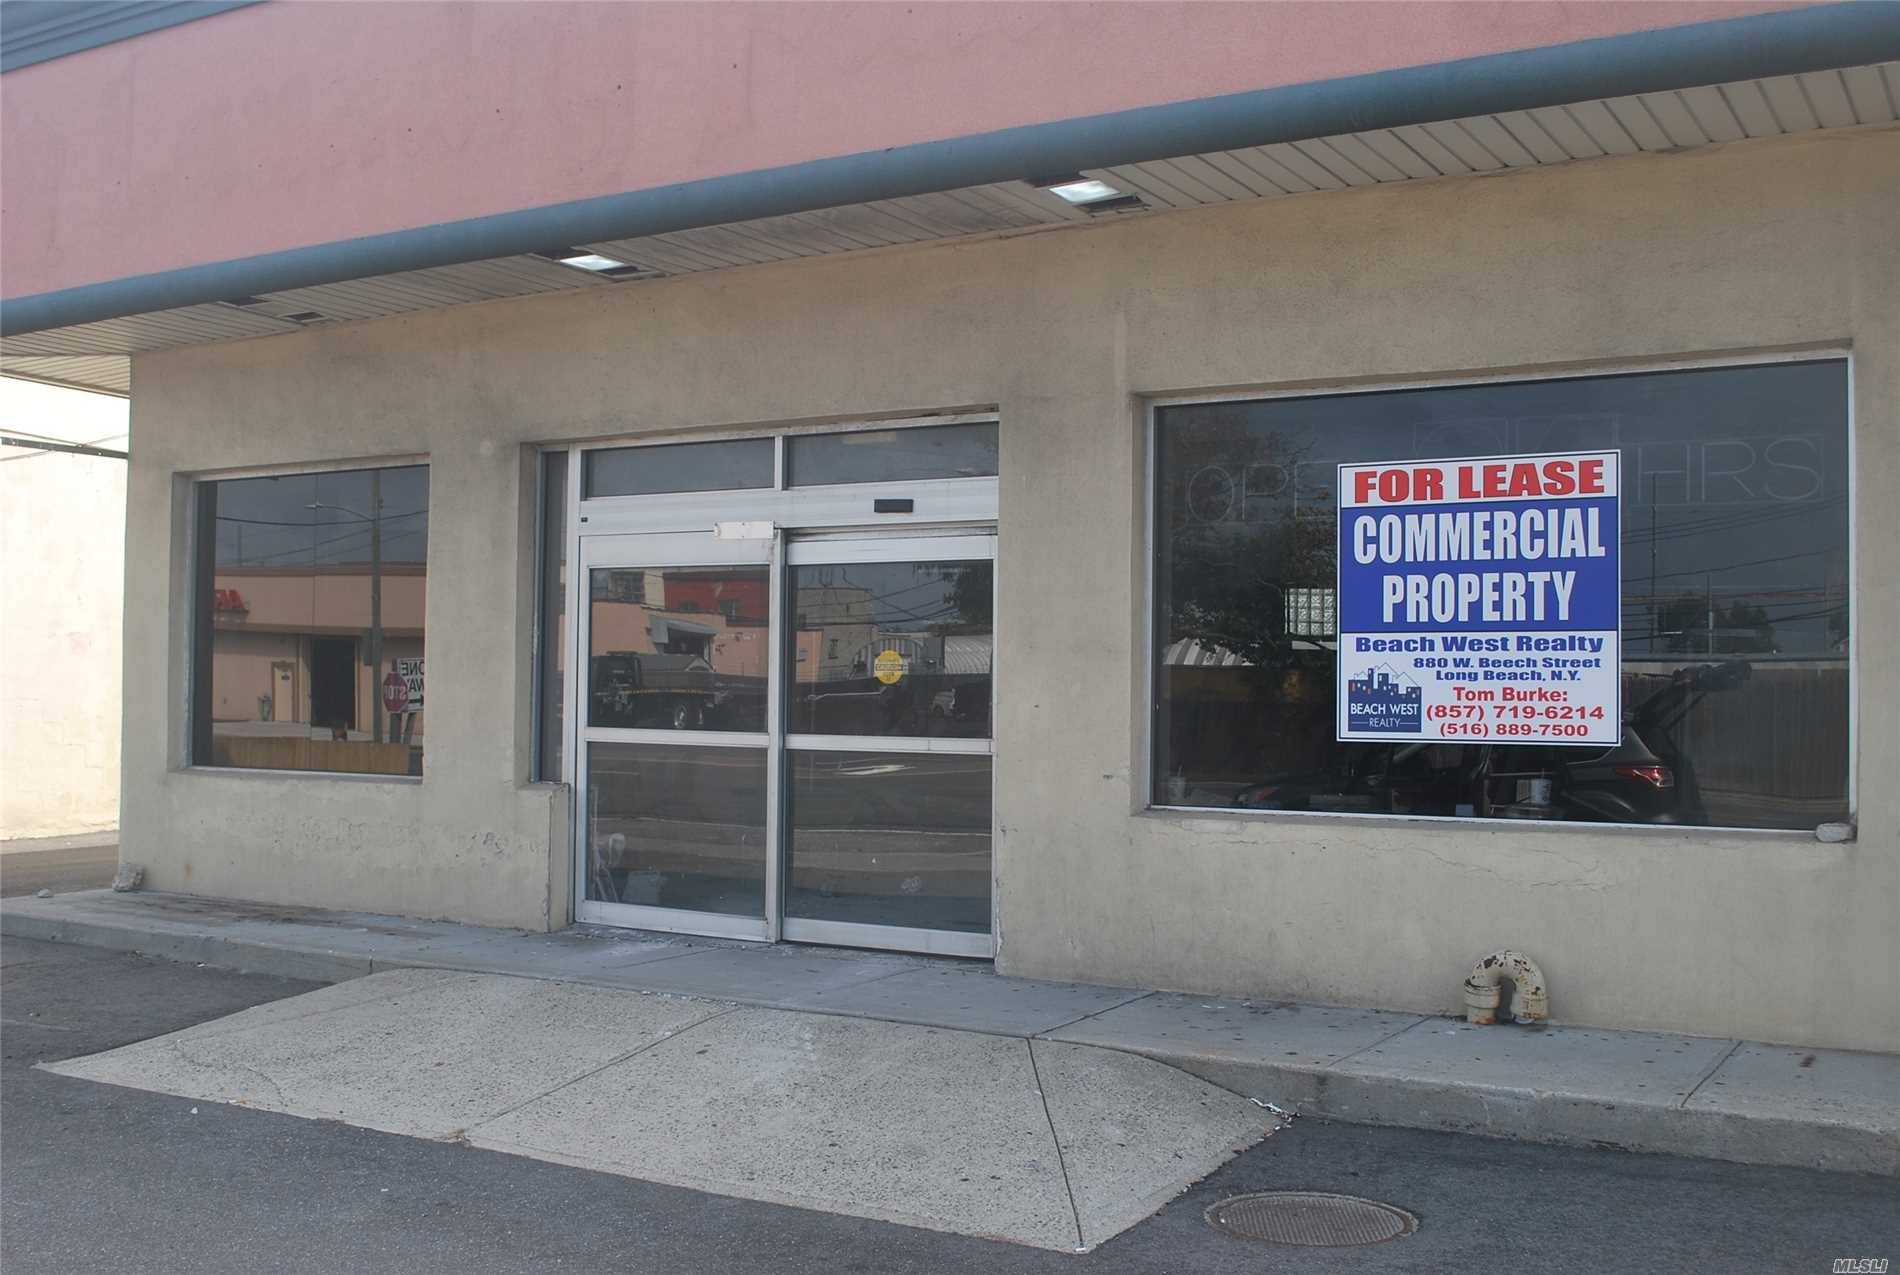 Commercial Space ; Large Affordable Storefront ; Located On Main Road With High Visibility ; On Site Parking ; Ideal For Retail, Professional Office.